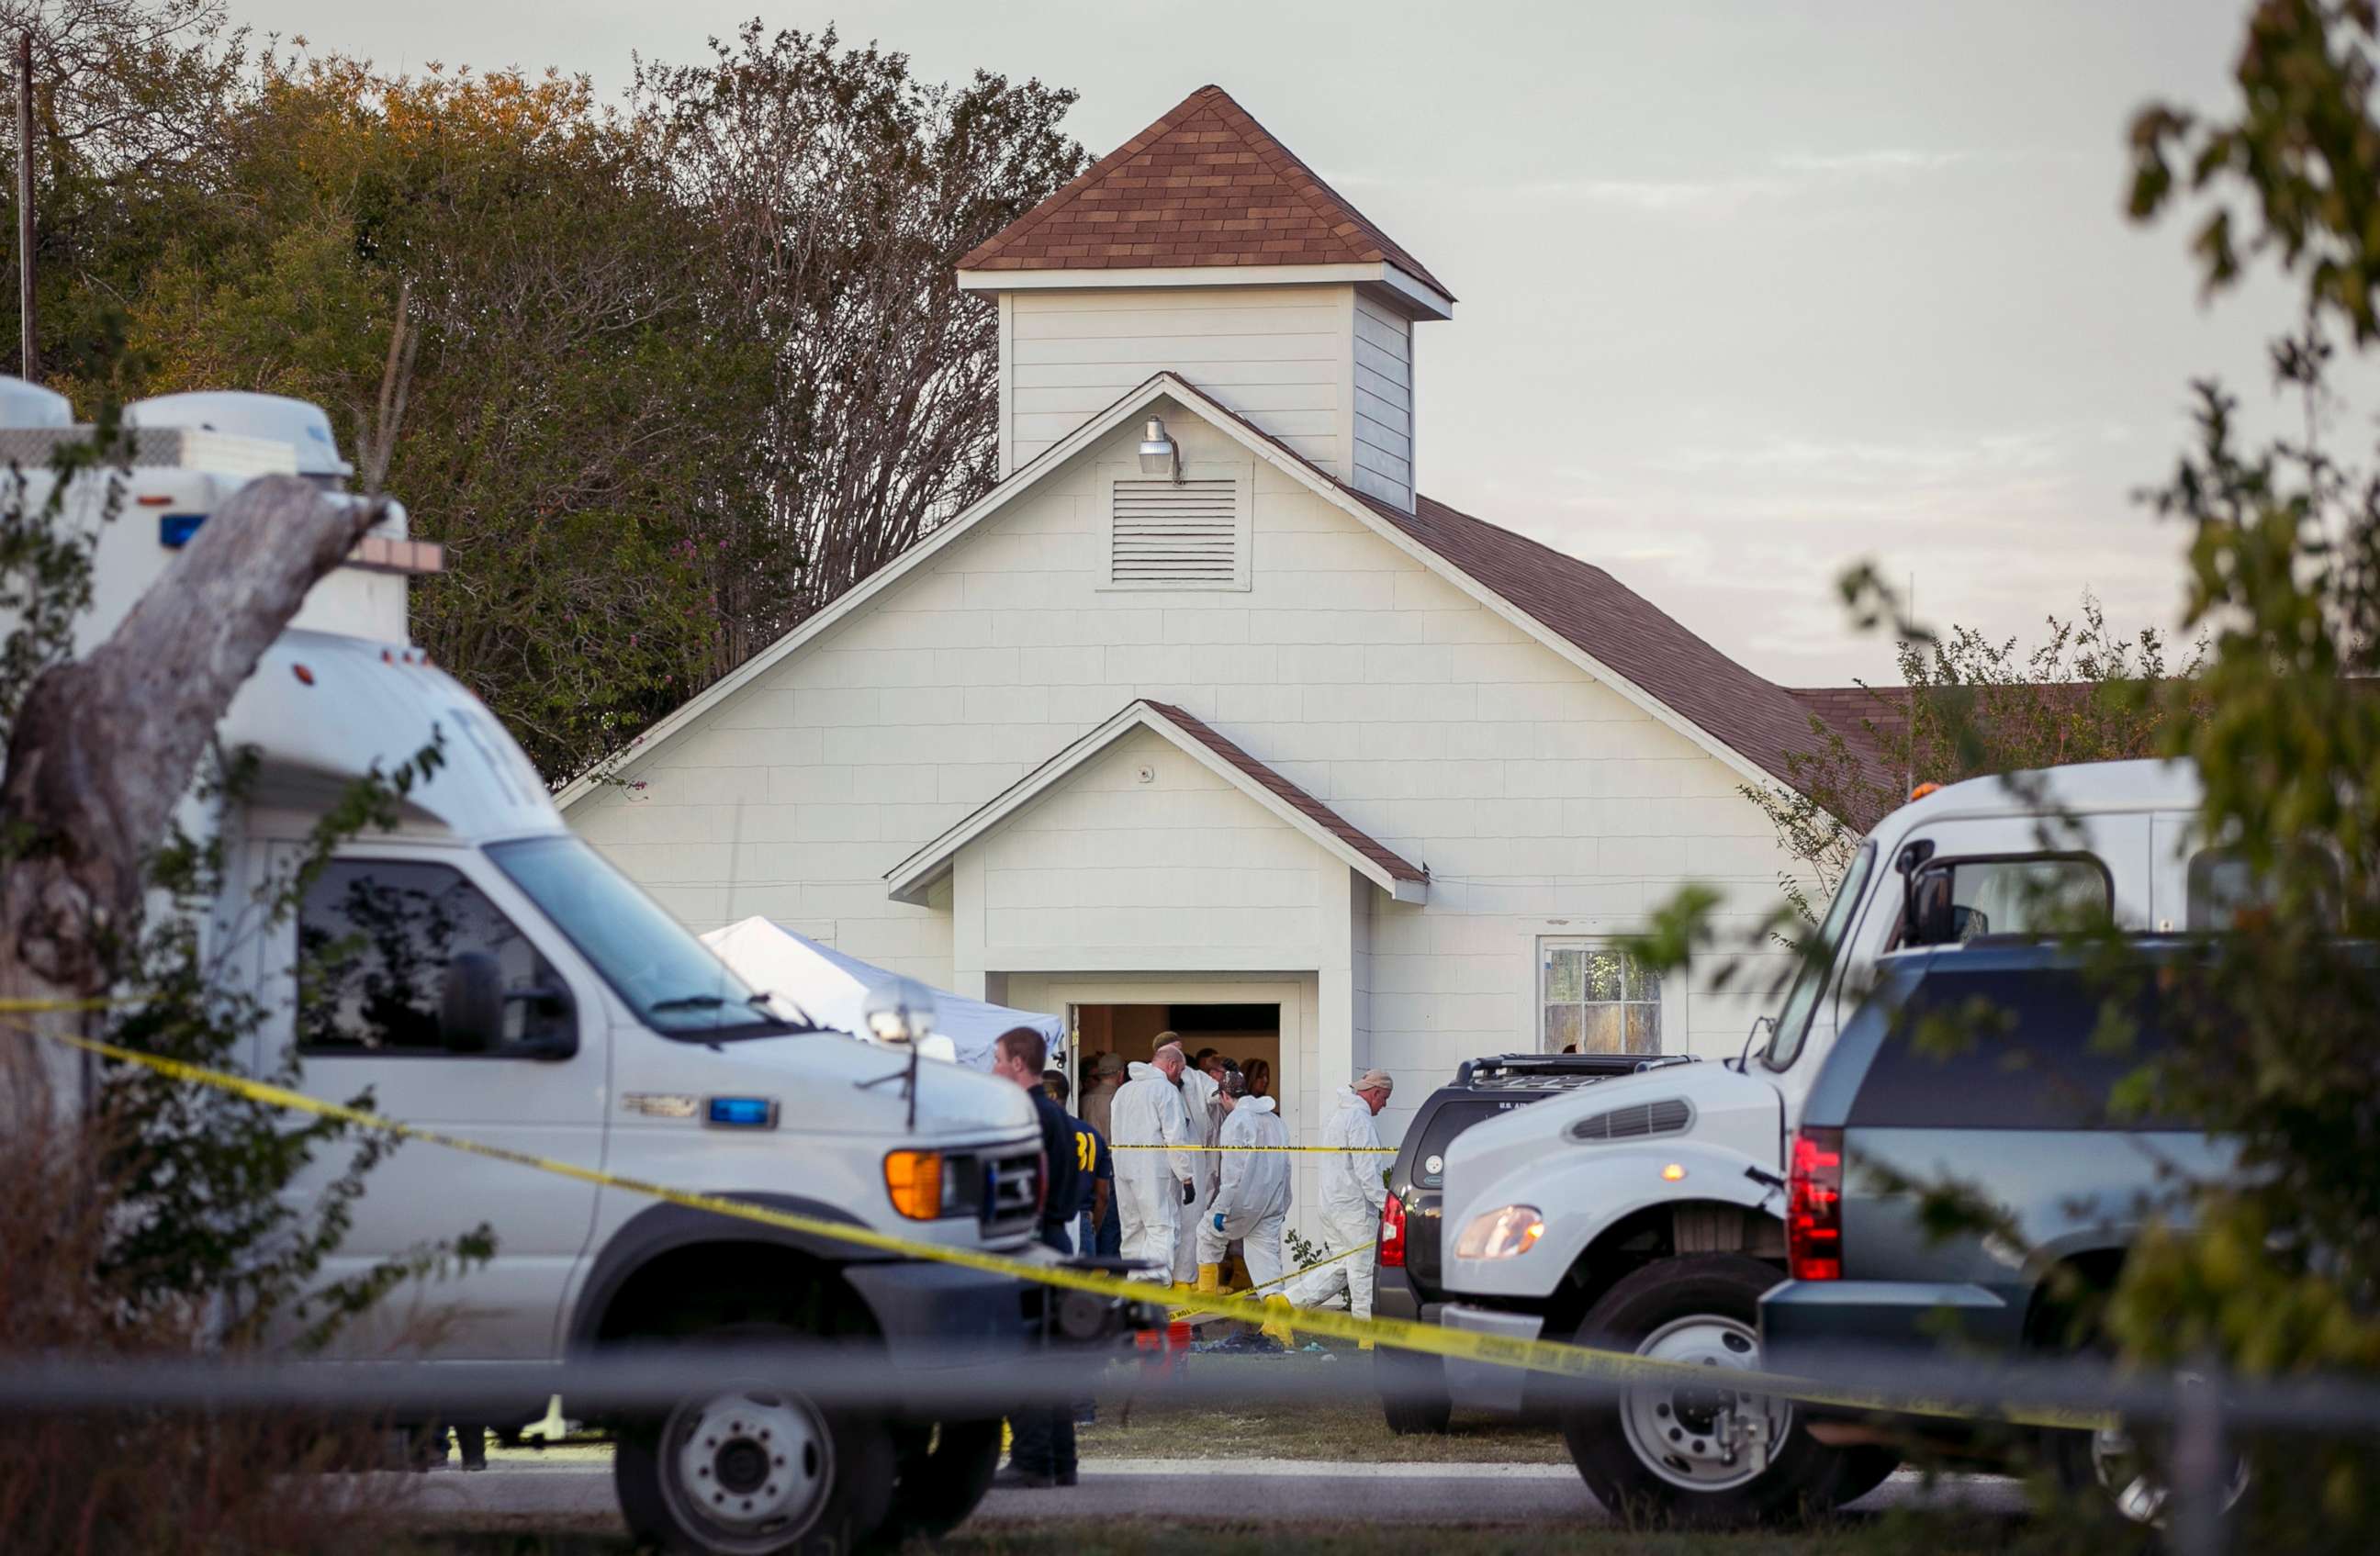 PHOTO: Investigators work at the scene of a mass shooting at the First Baptist Church in Sutherland Springs, Texas, Nov. 5, 2017.